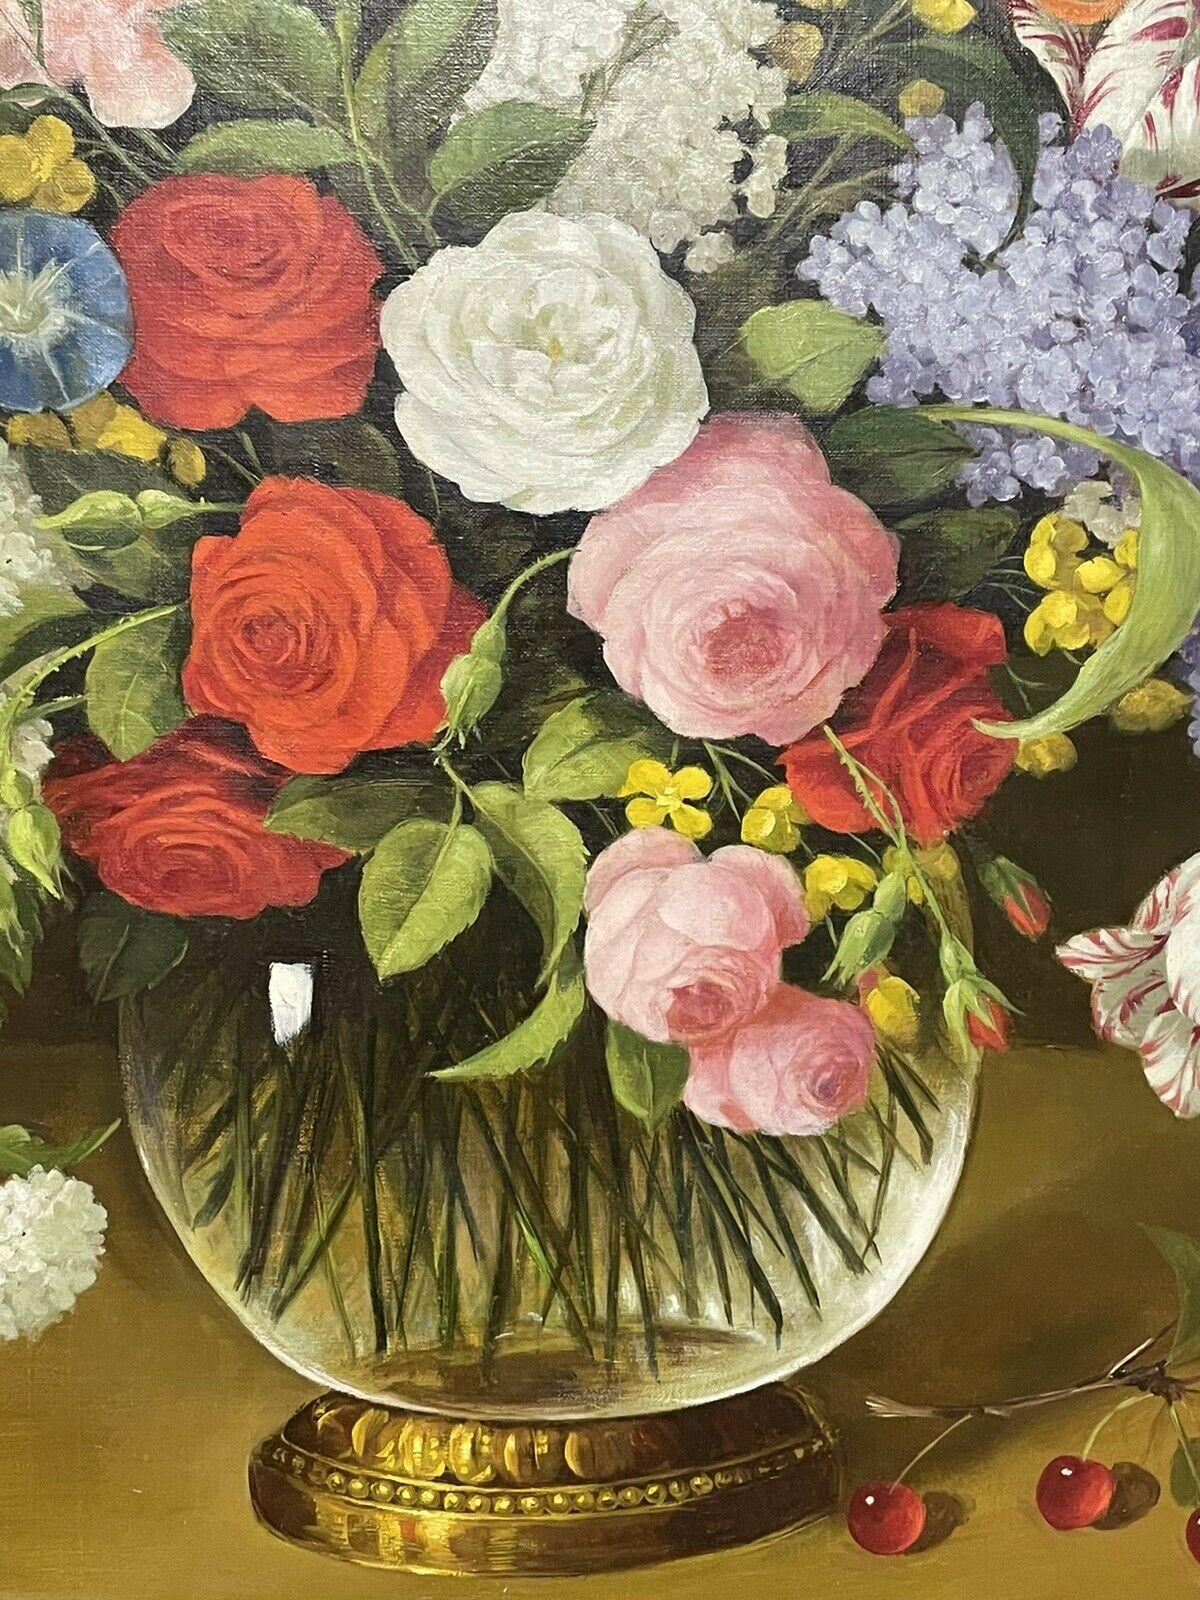 Artist/ School: French School, signed lower left, second half 20th century

Title: Ornamental Still Life Flowers within a Glass Vase

Medium: oil painting, on canvas, framed.

Size:       frame: 40.75 x 31.5 inches
               painting: 32 x 25.5